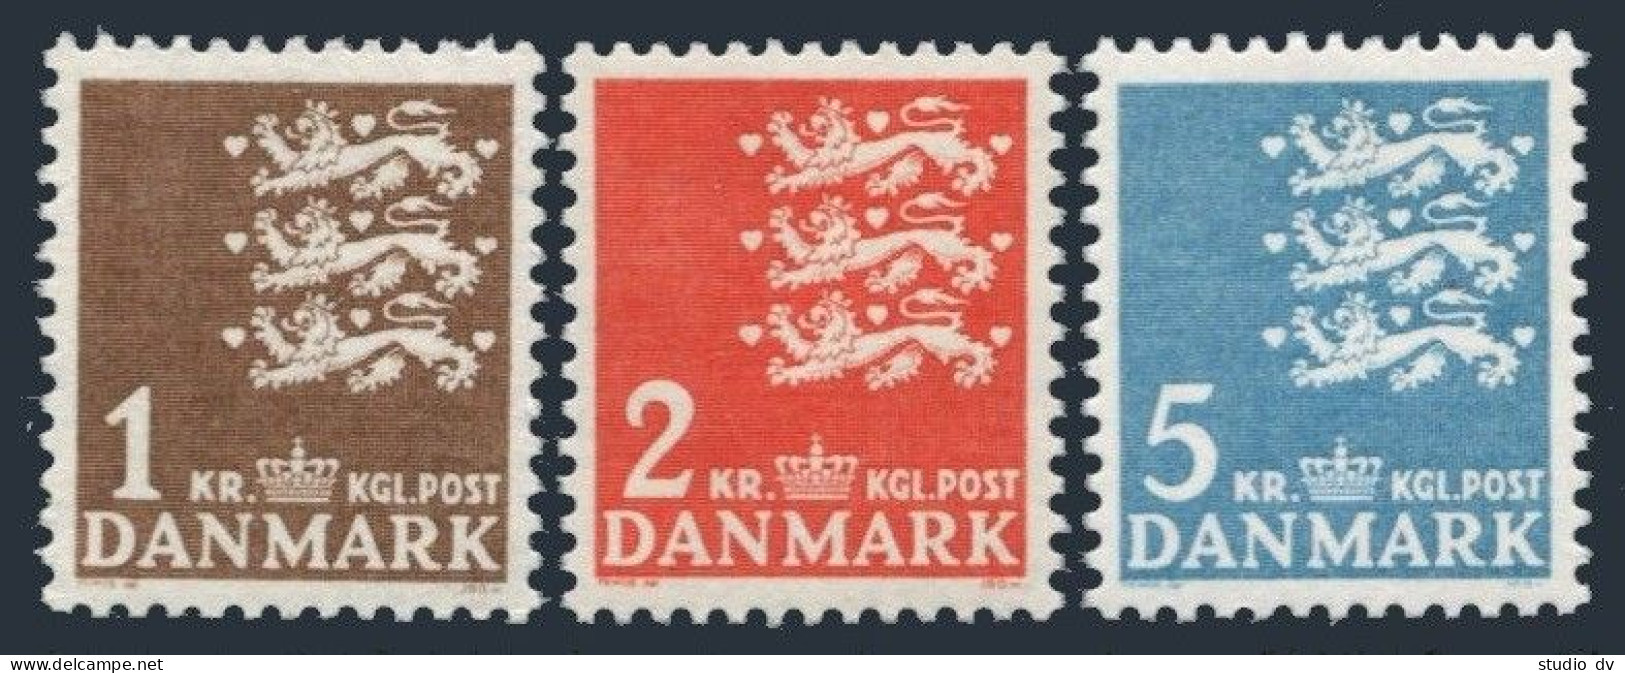 Denmark 297-299,MNH.Michel 289-291. Small State Seal.1946-1947. - Unused Stamps